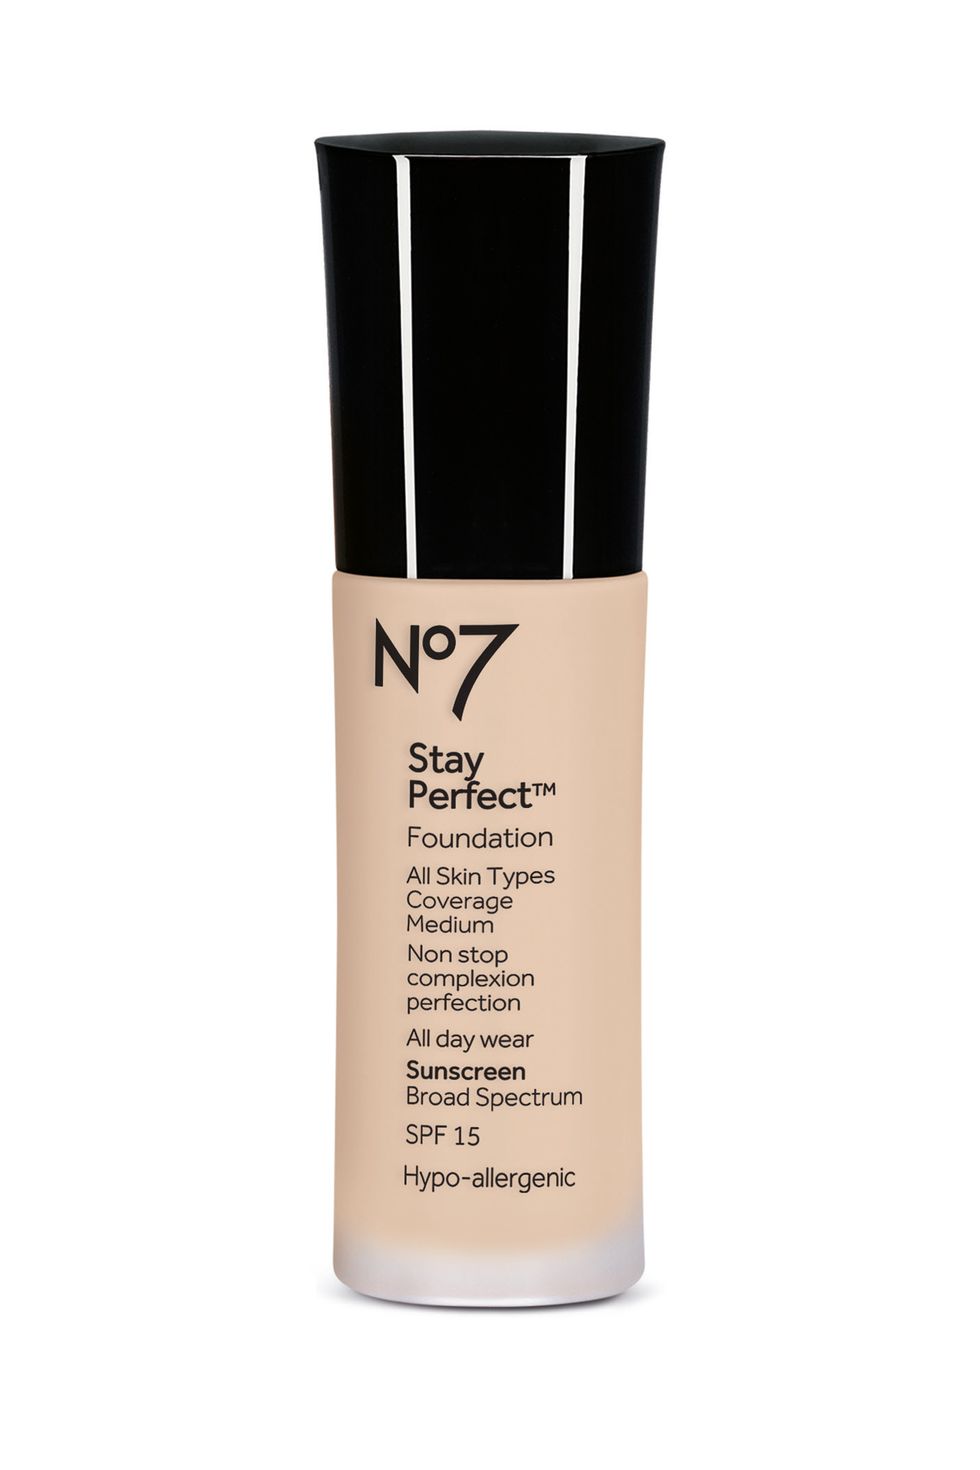 <p>Already a massive hit across the pond, this long-wearing, free-radical-fighting formula has finally arrived in the States. Go find out what all the fuss is about.</p><p>$15.99, <a href="http://www.ulta.com/stay-perfect-foundation-broad-spectrum-spf-15?productId=xlsImpprod14541073" target="_blank">ulta.com</a></p>